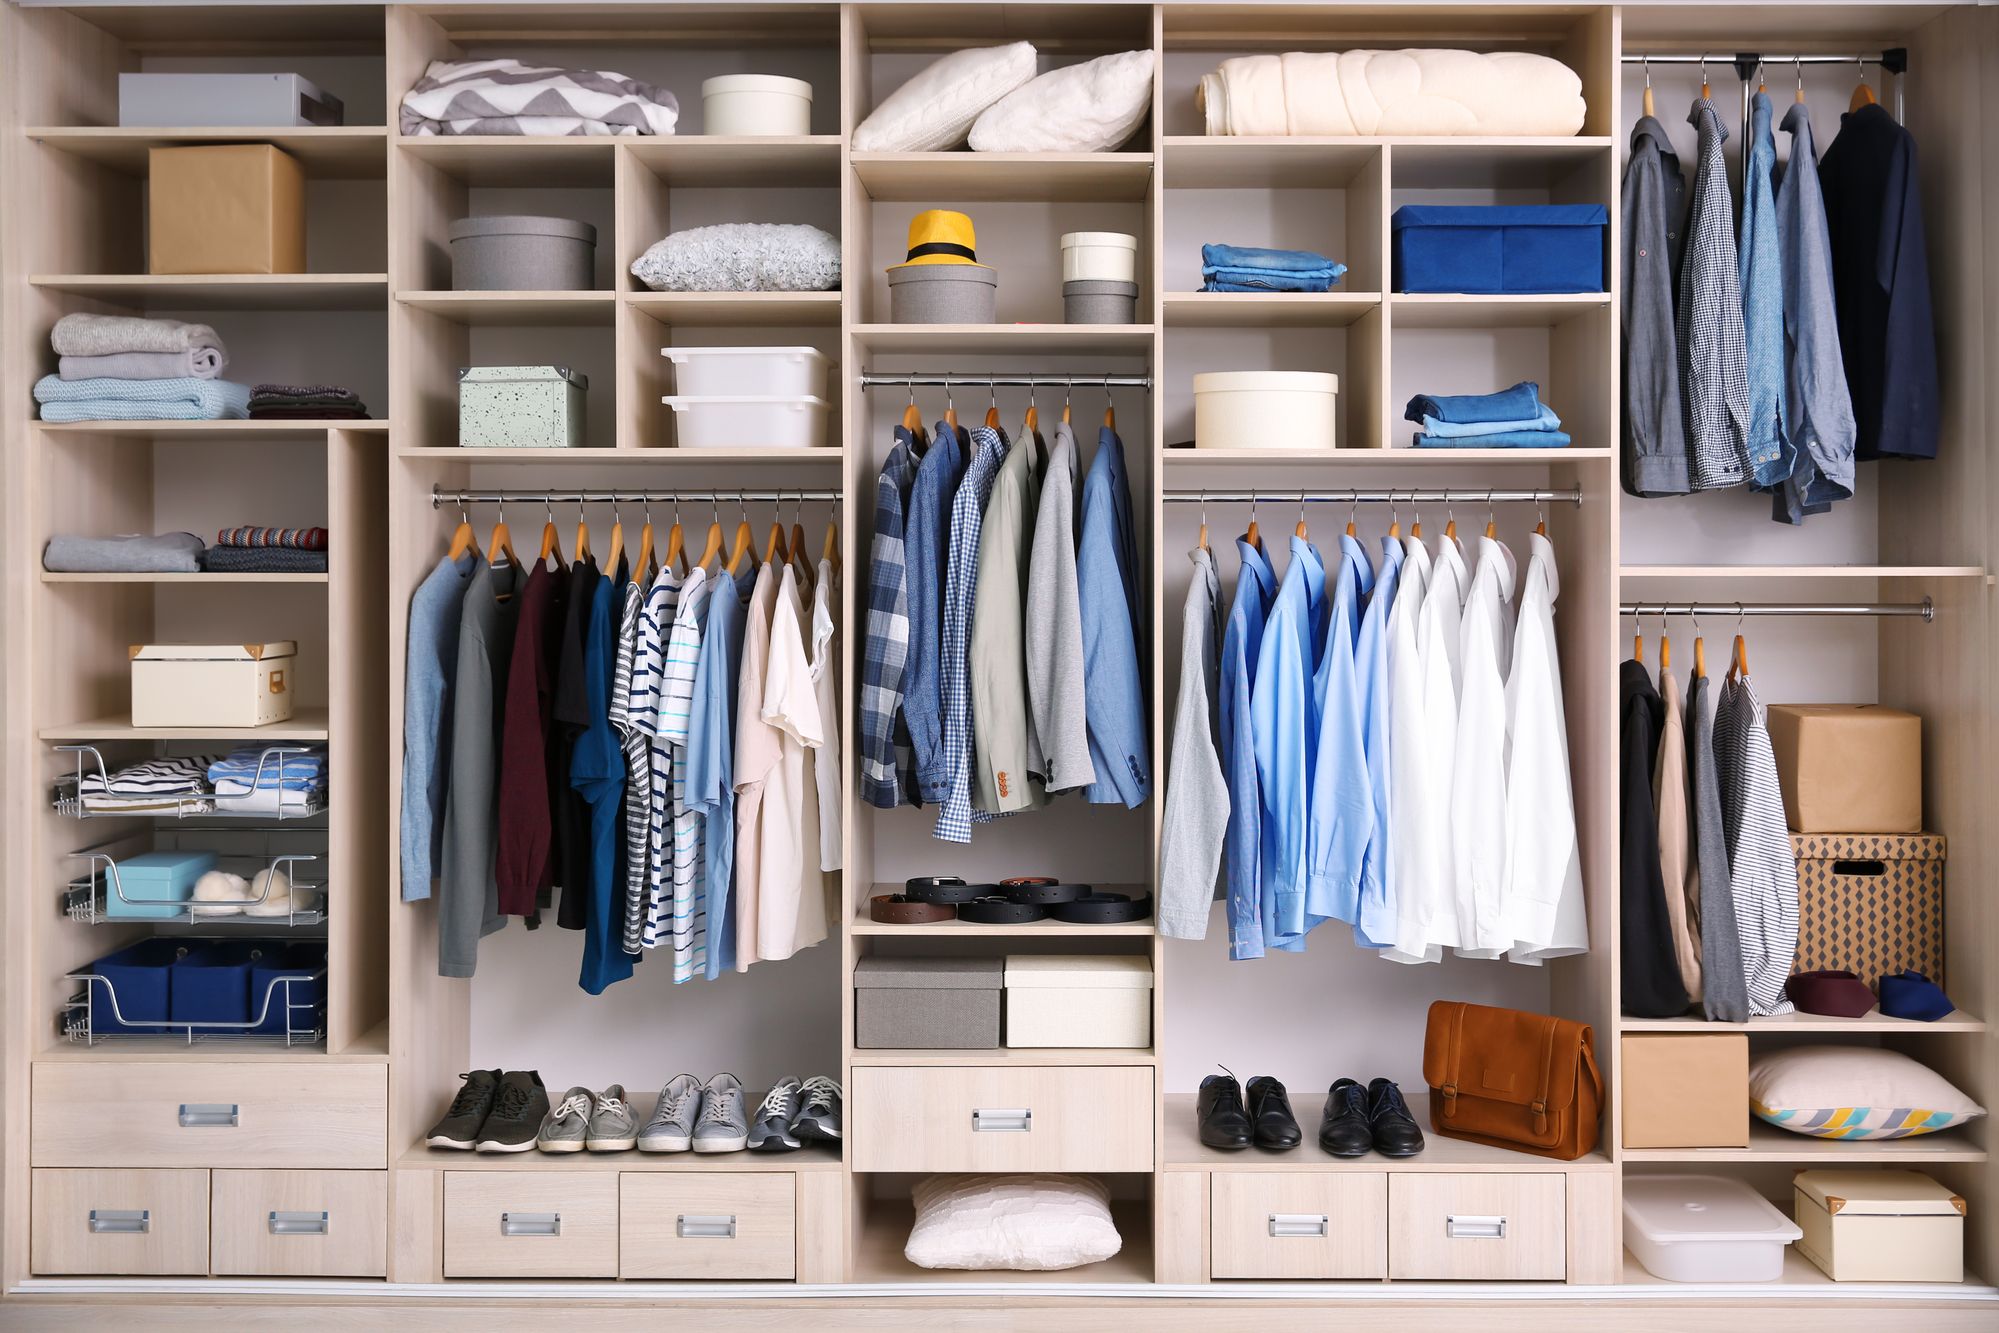 Closets By Design Lawsuit Says Sale Prices are Fake Top Class Actions